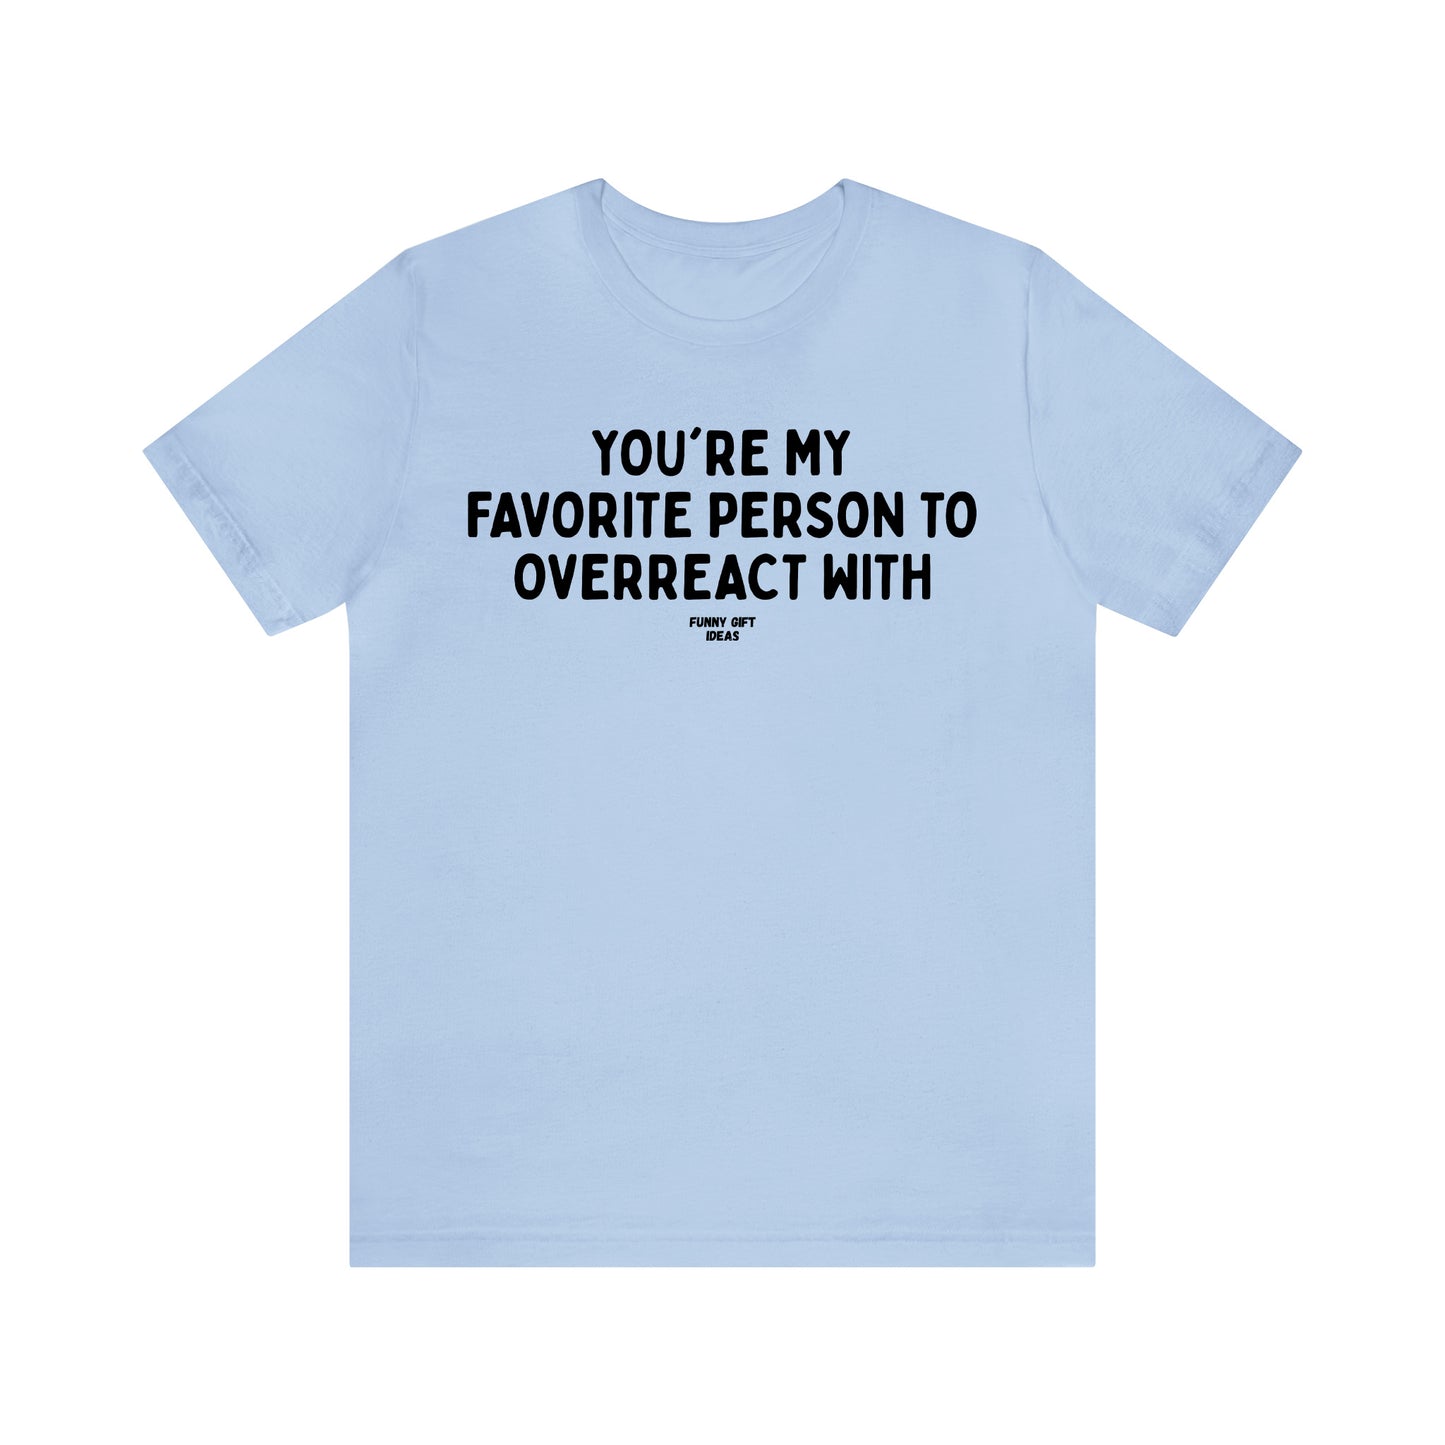 Funny Shirts for Women - You're My Favorite Person to Overreact With - Women's T Shirts